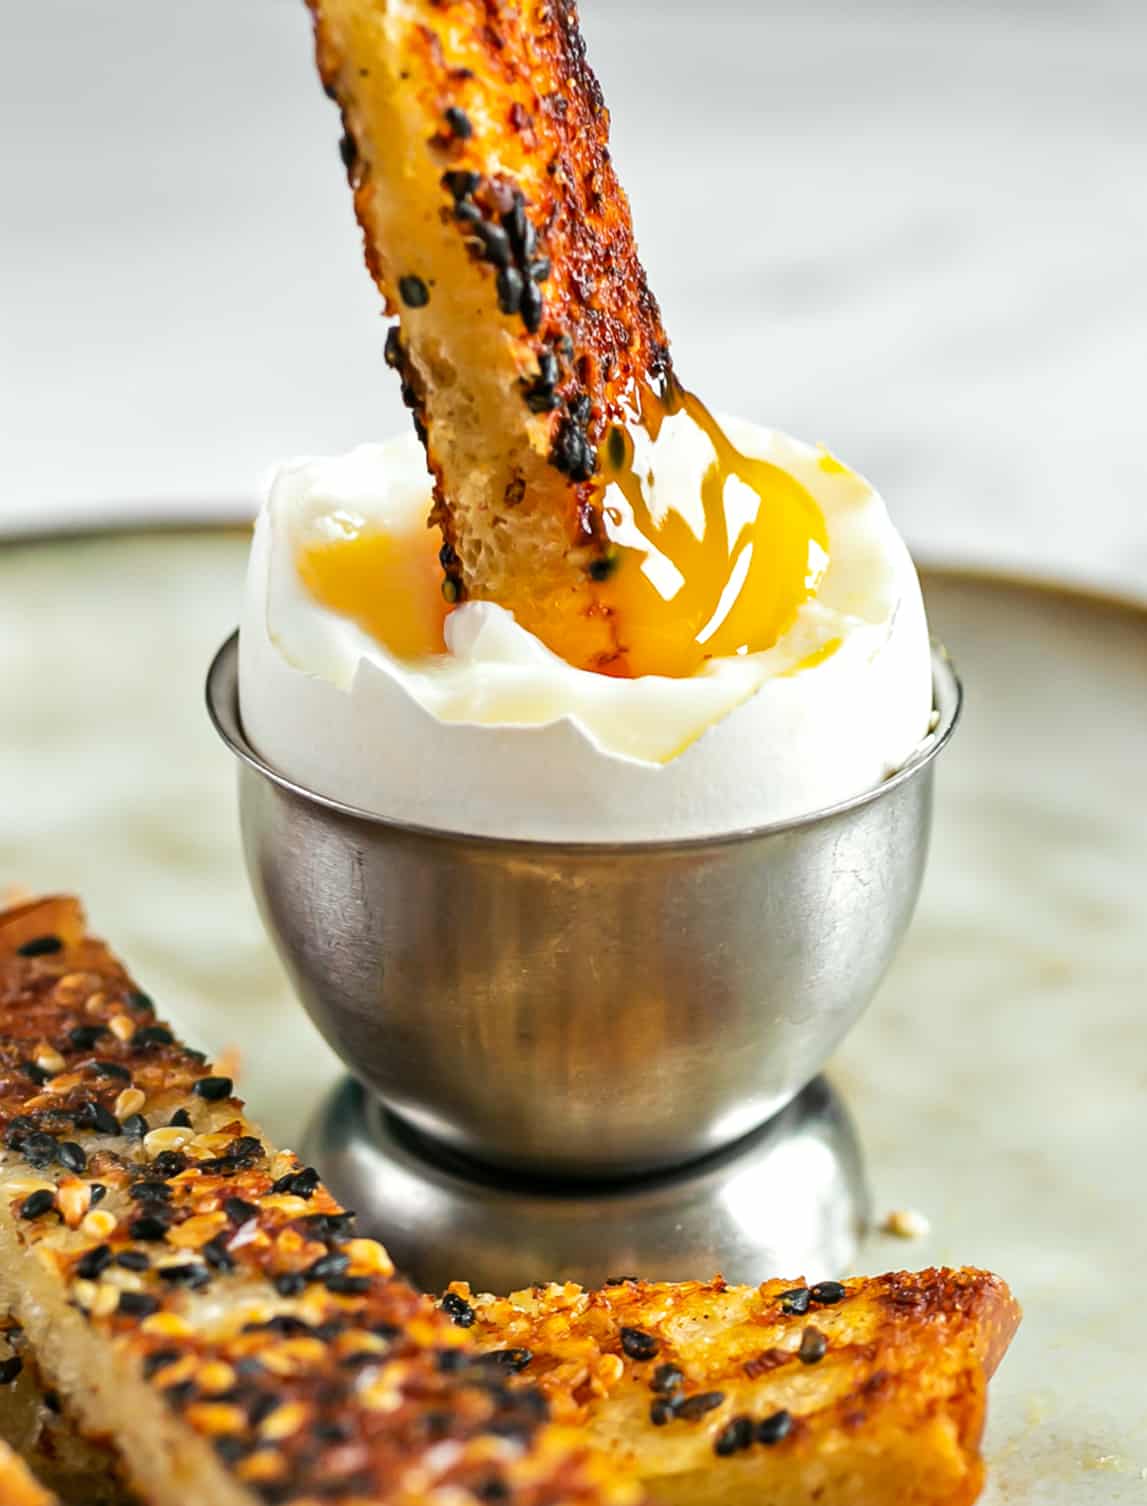 https://flaevor.com/wp-content/uploads/2022/10/Soft-Boiled-Egg-with-Parmesan-Crusted-Soldiers.jpg